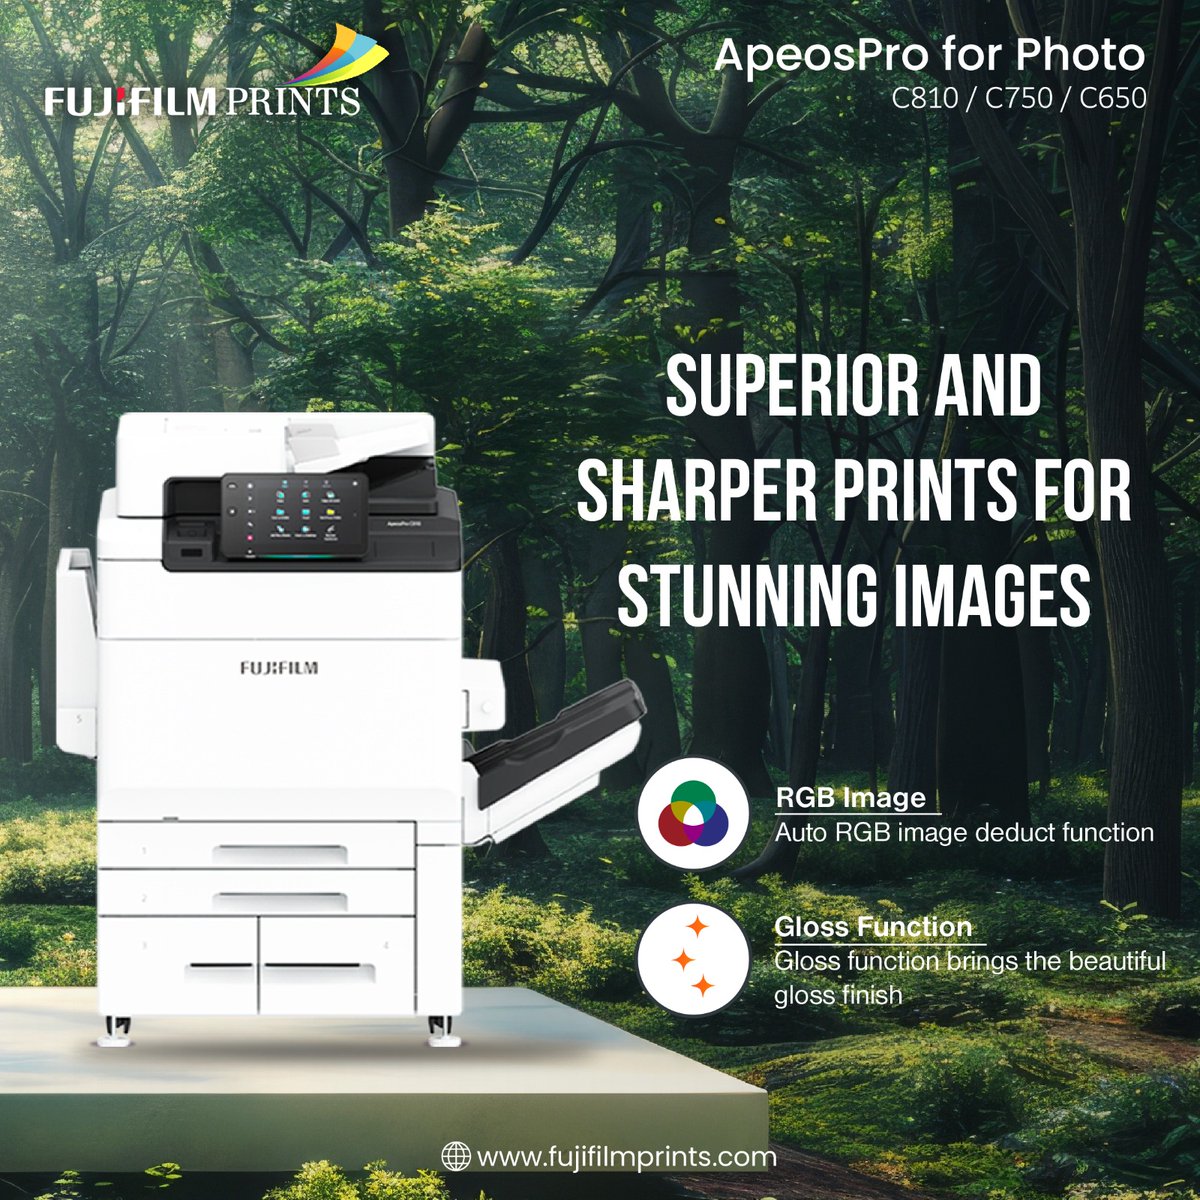 Superior And Sharper Prints For Stunning Images.

ApeosPro For Photo
C810/C750/C650

#fujifilm #fujifilmprints #photofinishing #photoproducts #qualityprinting #fujifilmpaper #fujifilmsystems #photography #weddingphotos #bestsolution